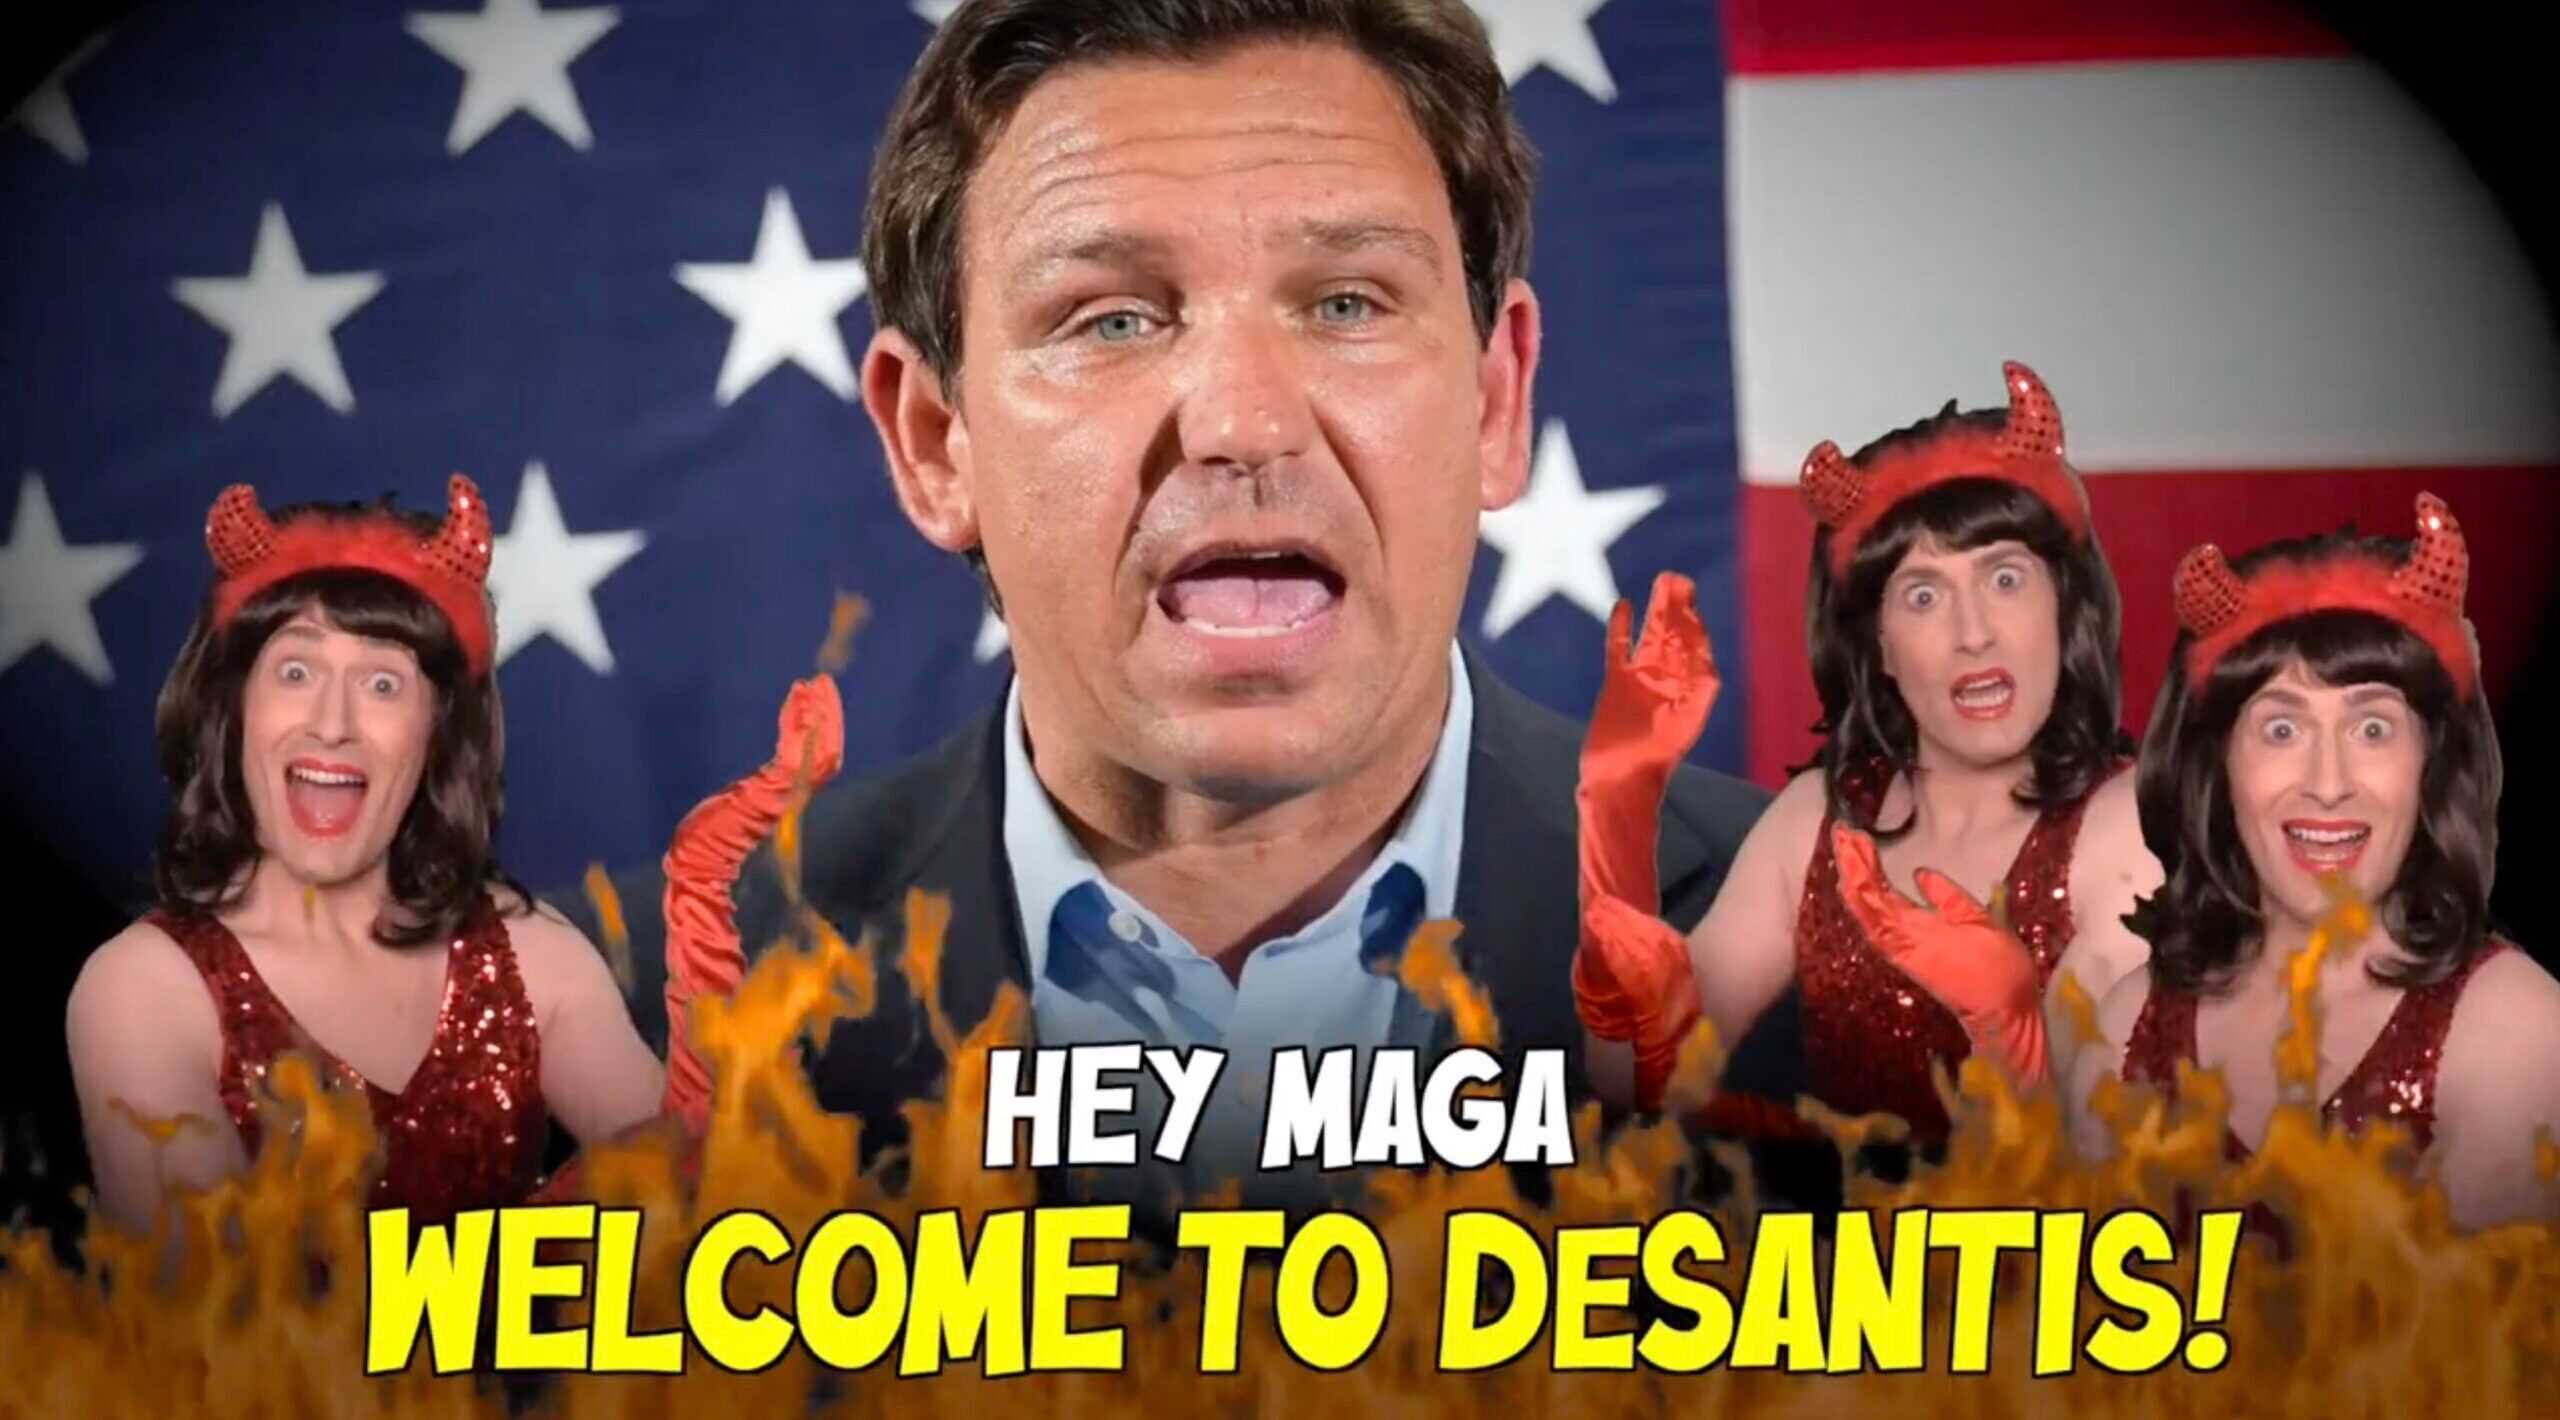 Randy Rainbow screenshot of video parodying Ron DeSantis. Several Randy's dressed as the devil point to a photo of Ron DeSantis